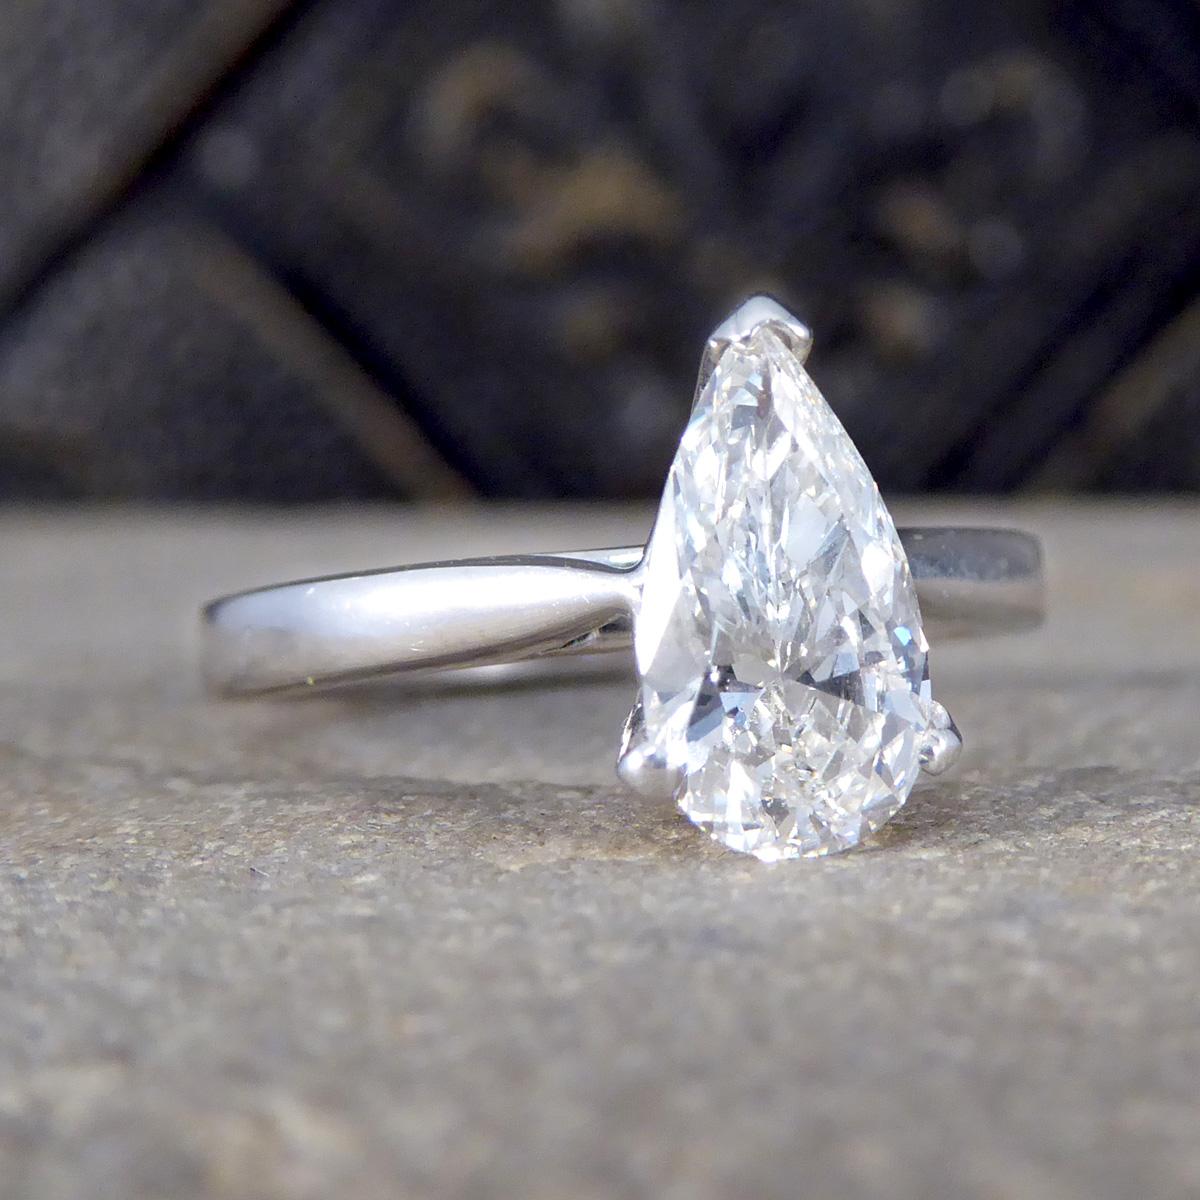 A gorgeous Pear cut Diamond ring. Featuring and clear and bright Pear cut Diamond weighing approximately 1.42ct in a three claw setting. The Diamond itself has a higher grade of colour and clarity assessed as G in colour and VS2 in clarity, allowing